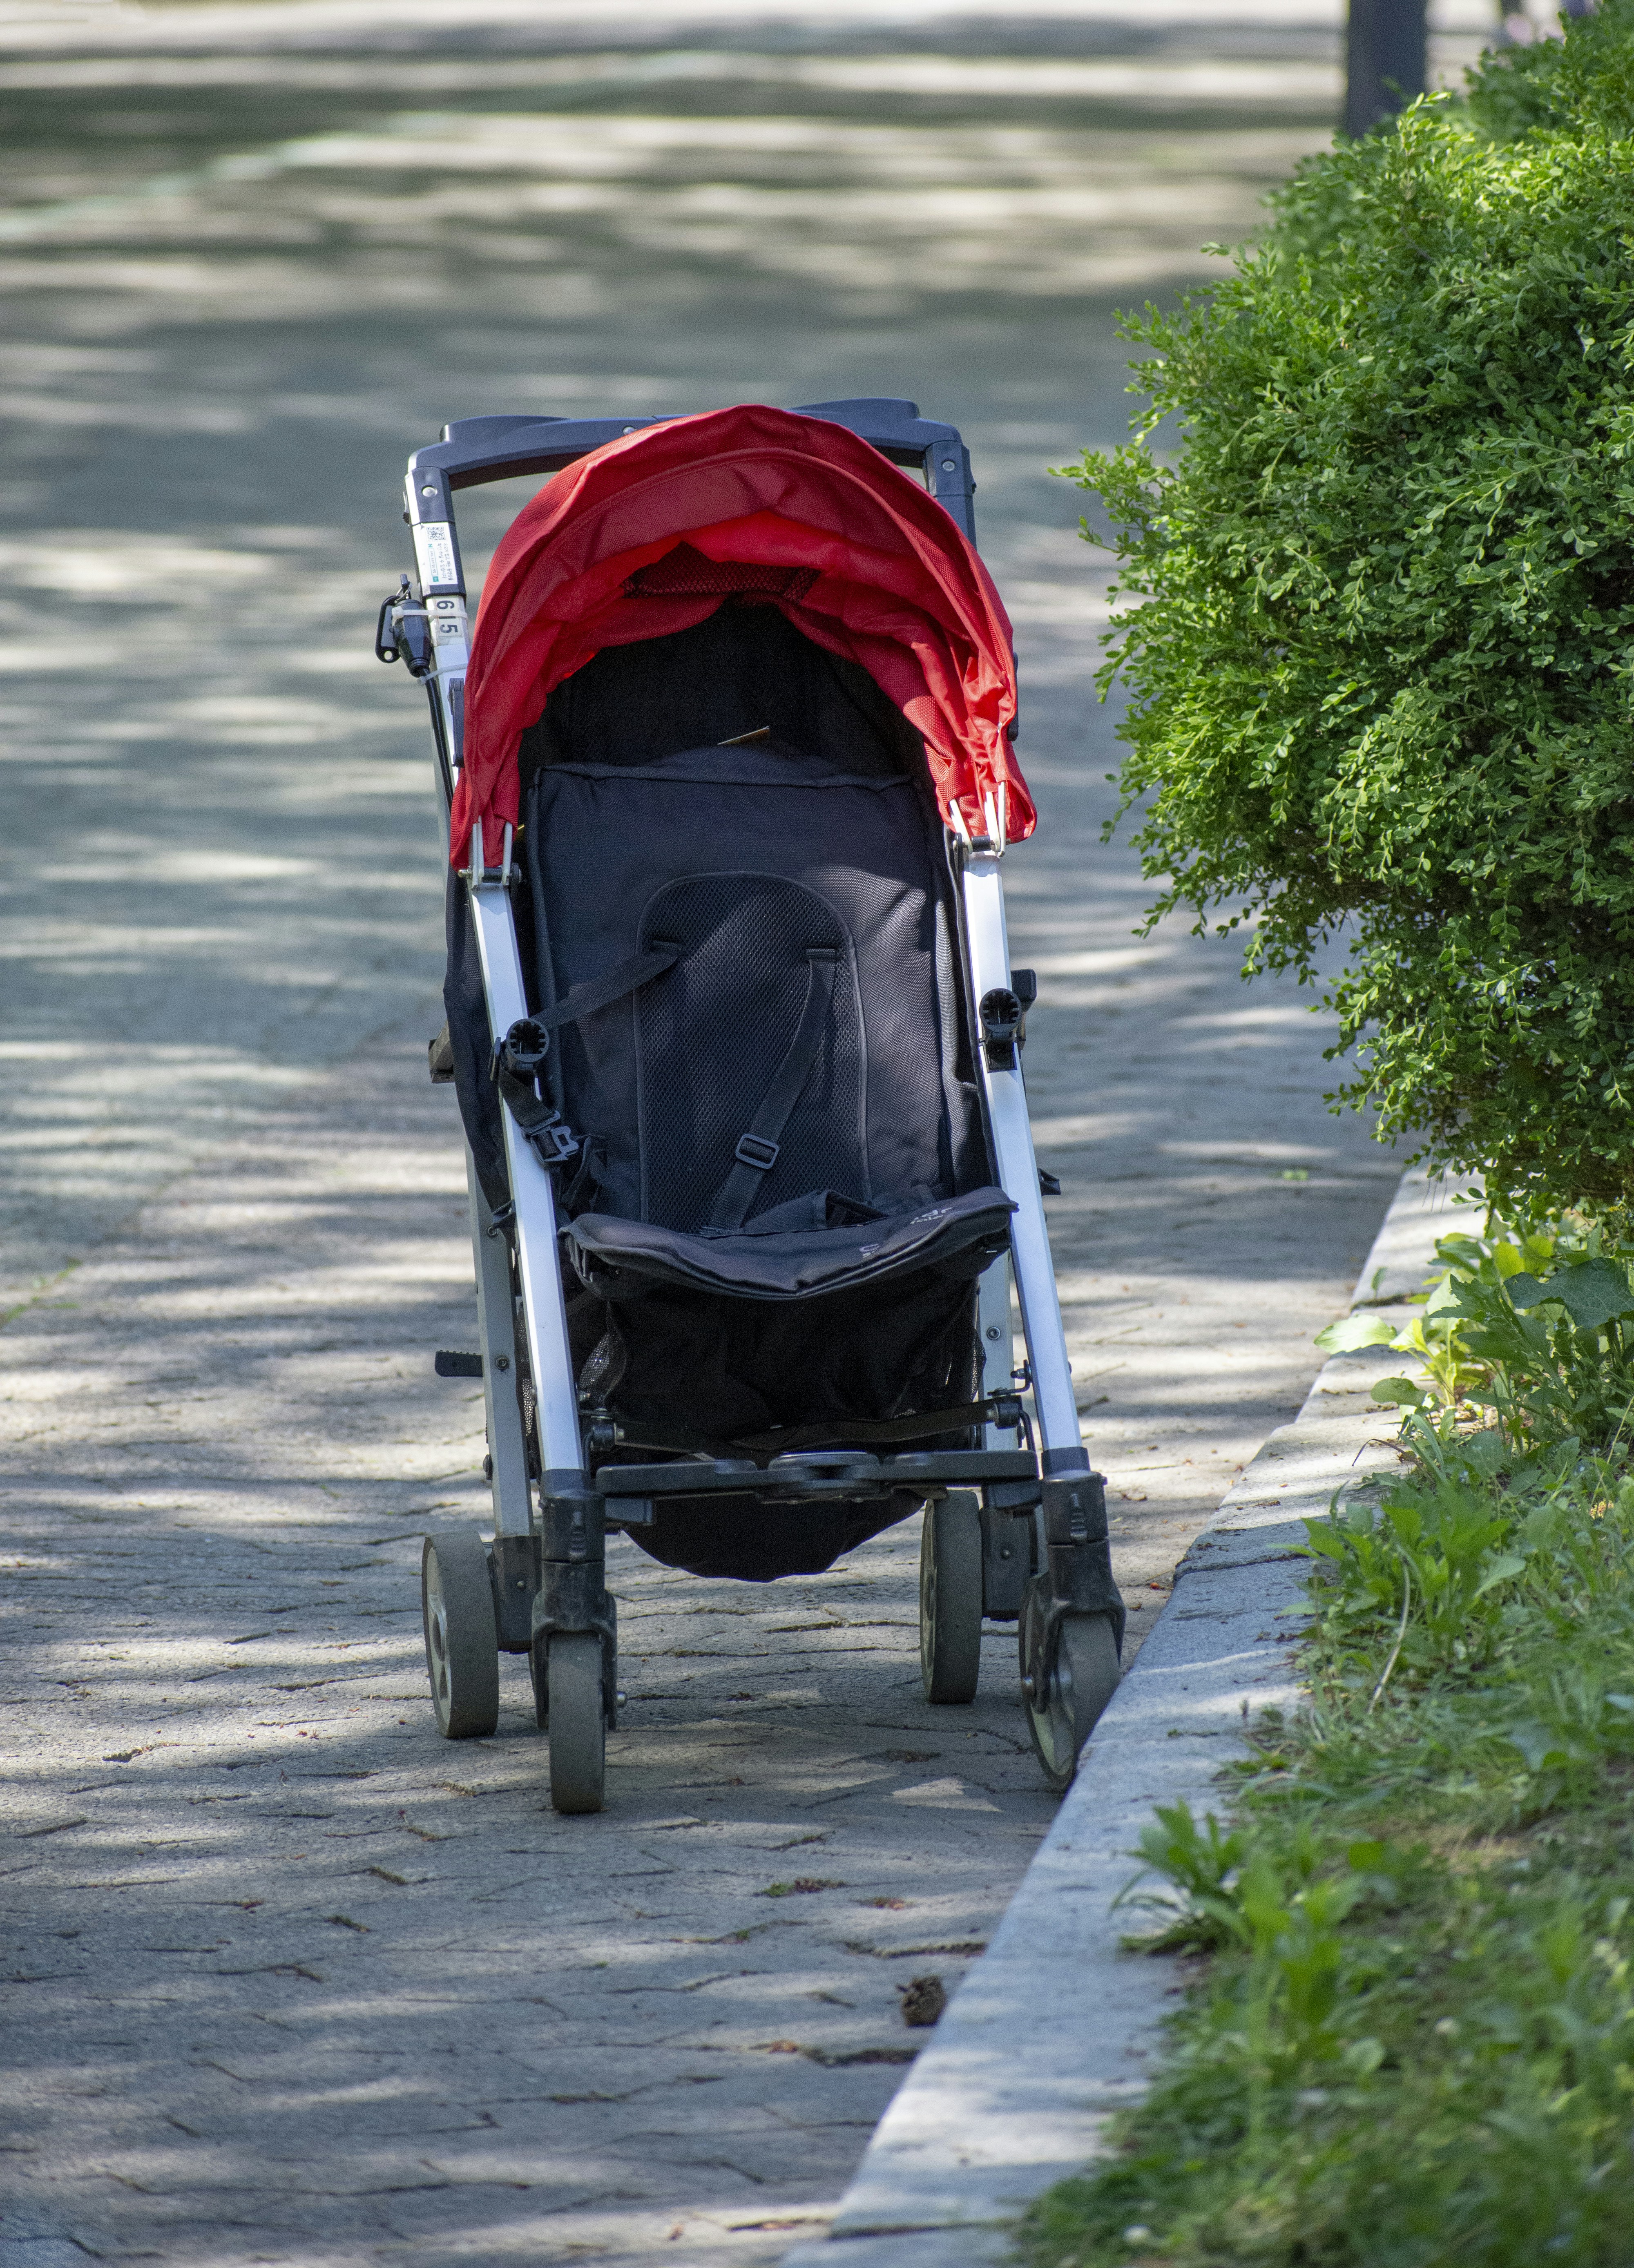 Whats The Weight Limit Of A Stroller And For How Long Can A Child Use It?